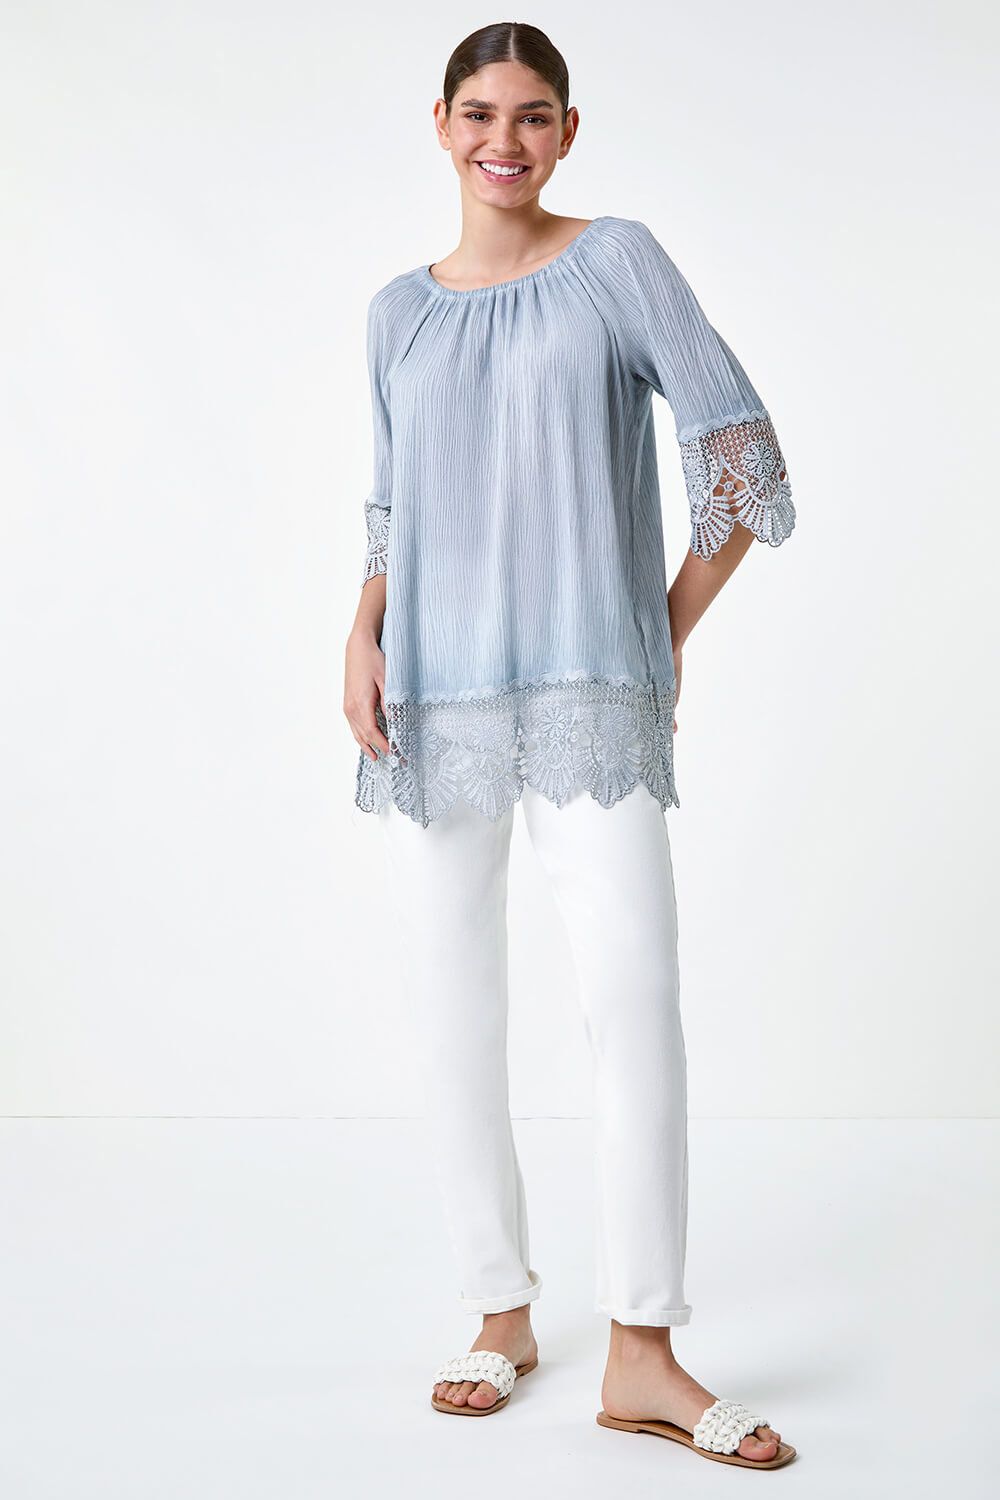 Blue Lace Trim Textured Bardot Top, Image 2 of 5